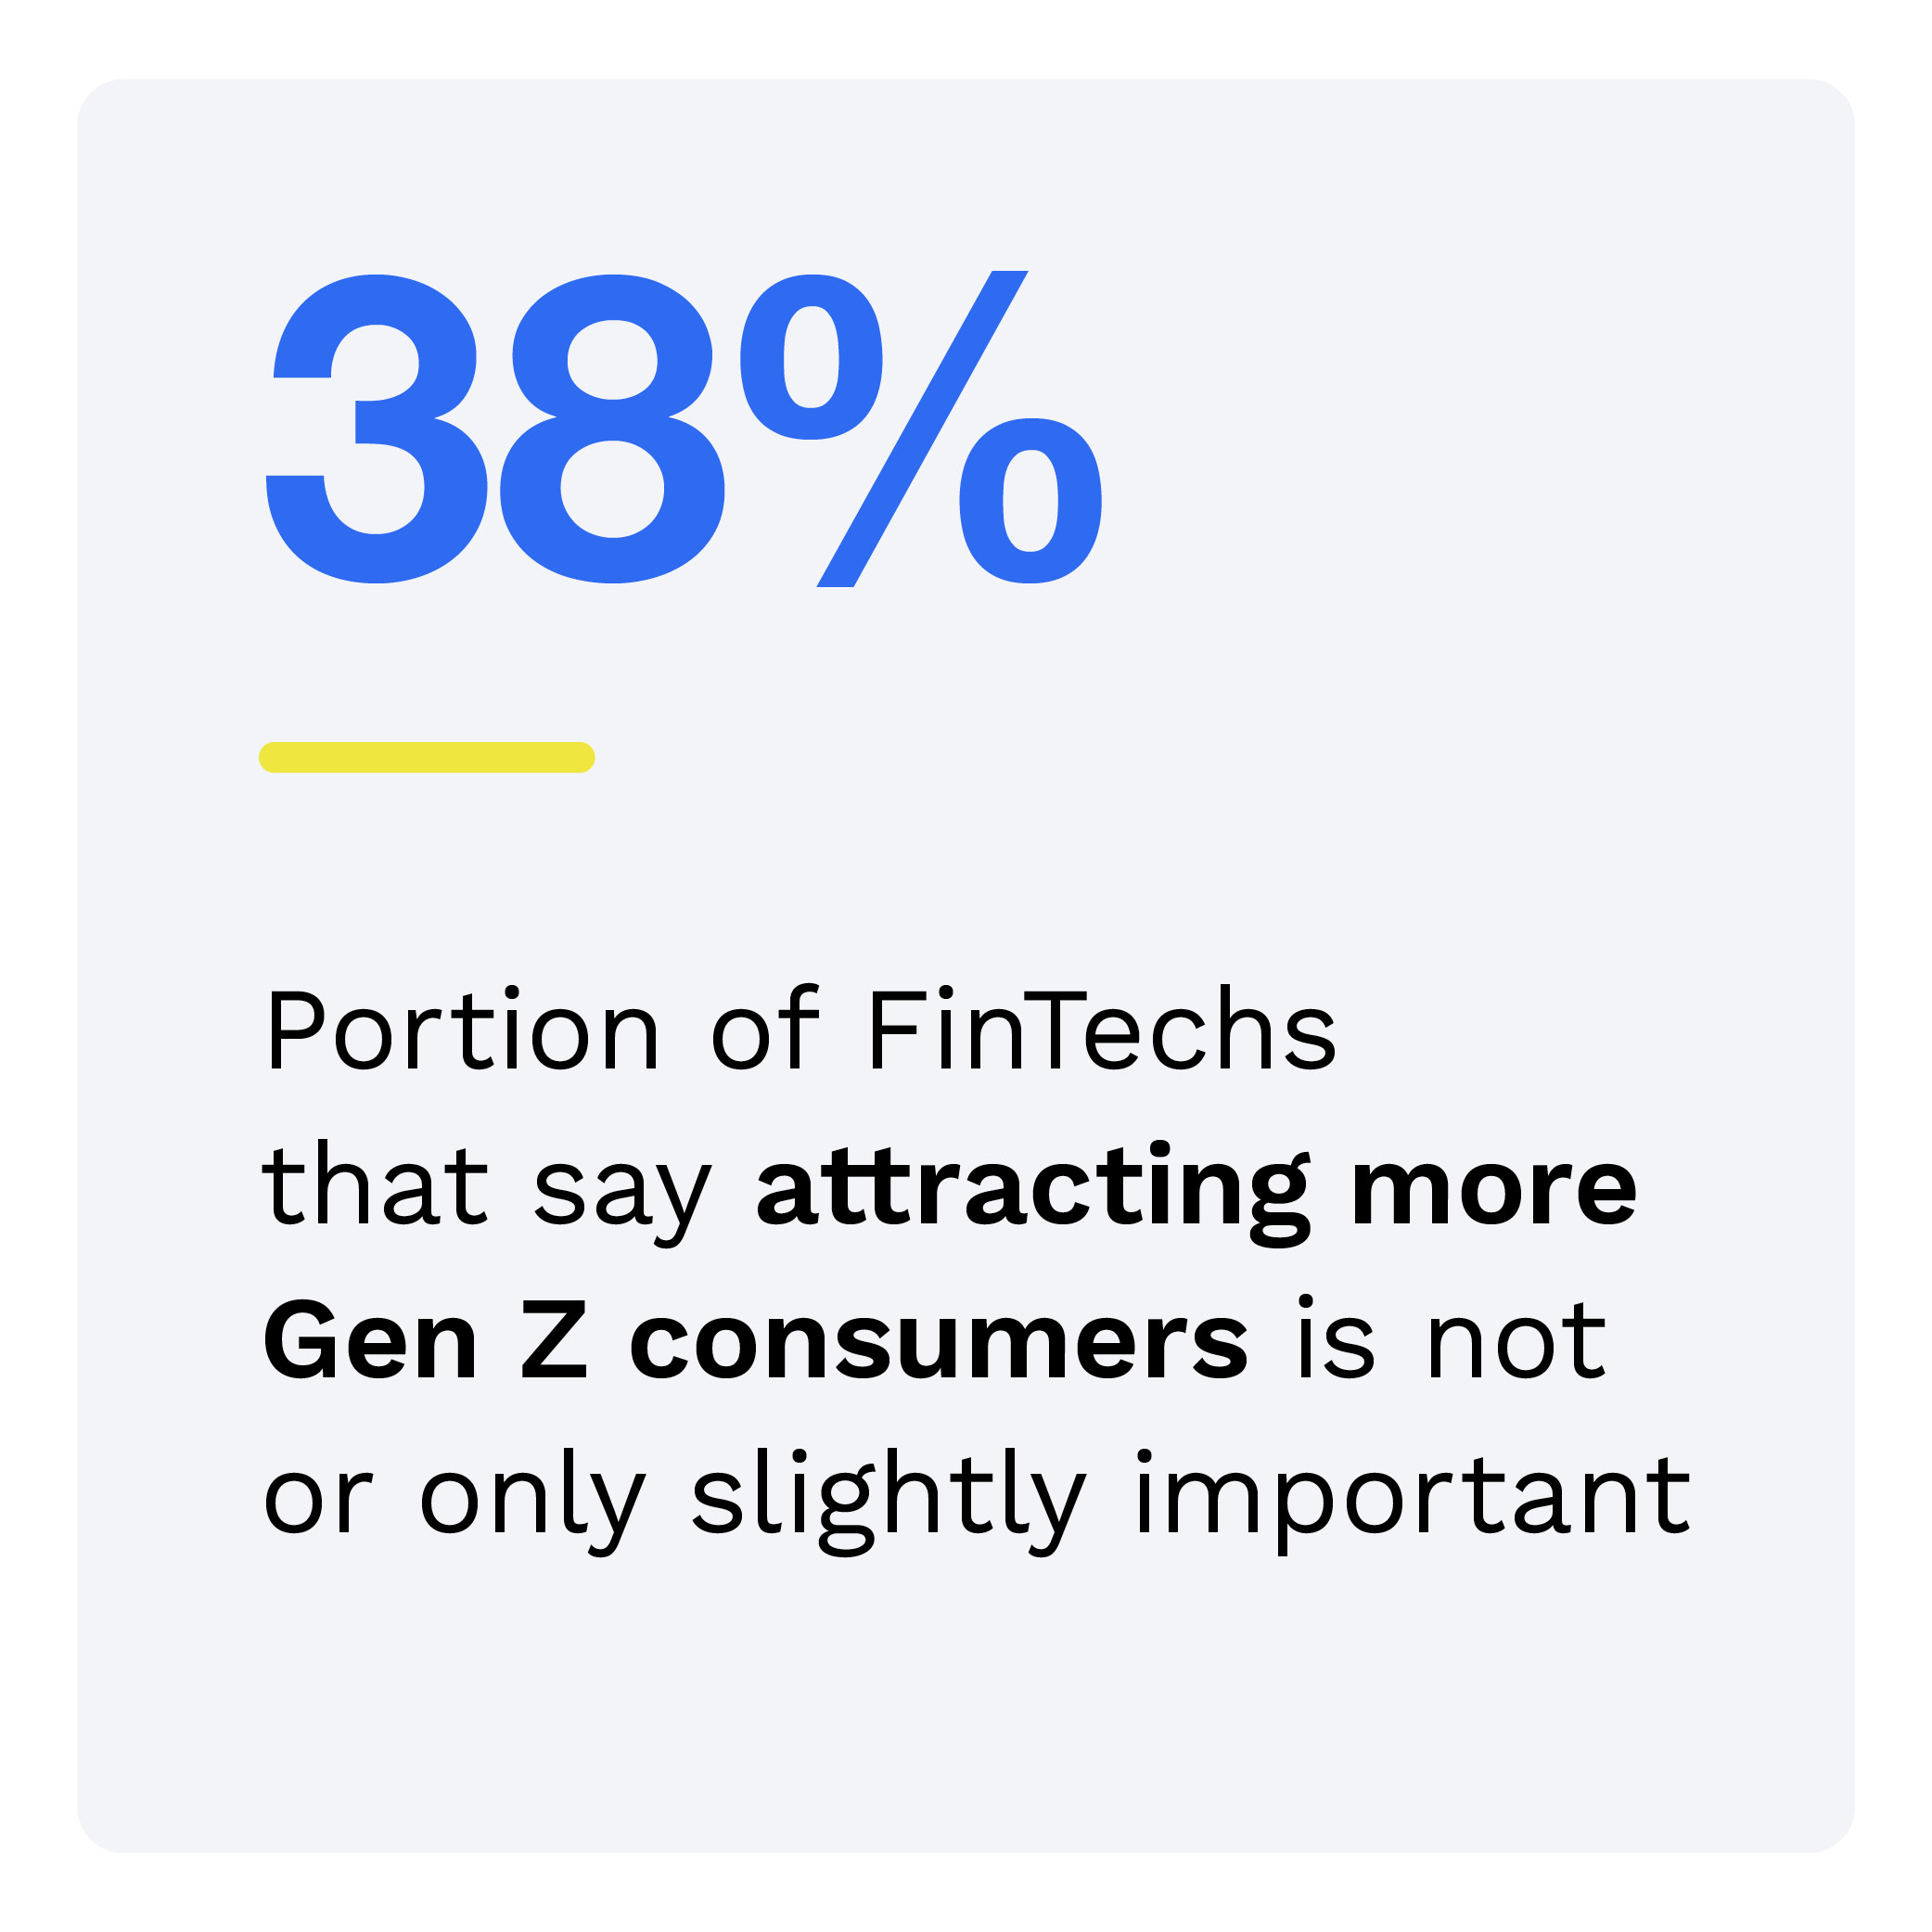 38%: Portion of FinTechs that say attracting more Gen Z consumers is not or only slightly important